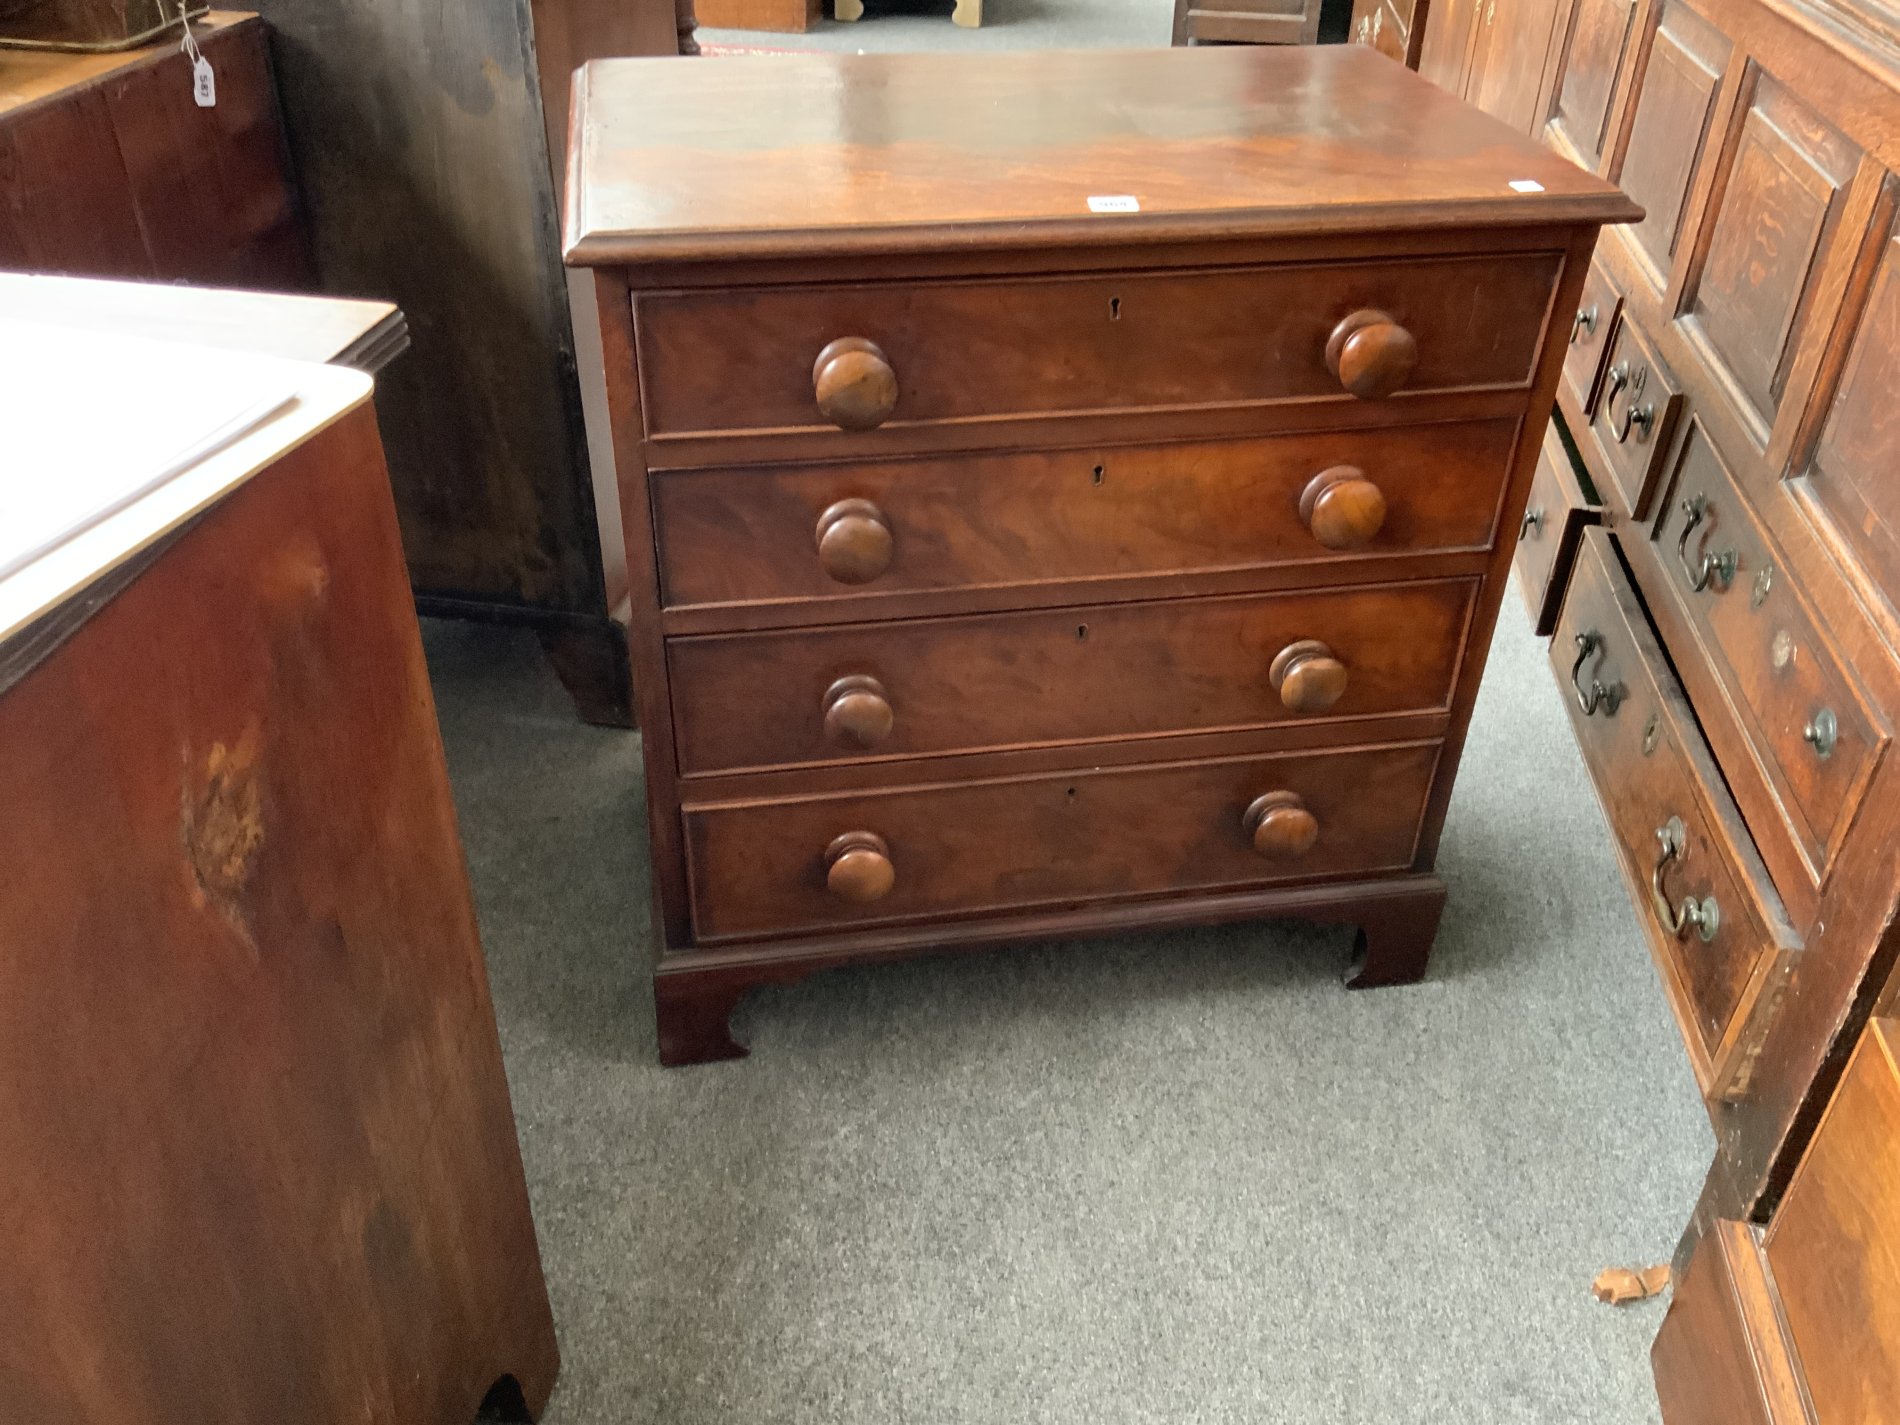 AN EARLY 19TH CENTURY MAHOGANY SMALL FOUR DRAWER CHEST - Image 2 of 7